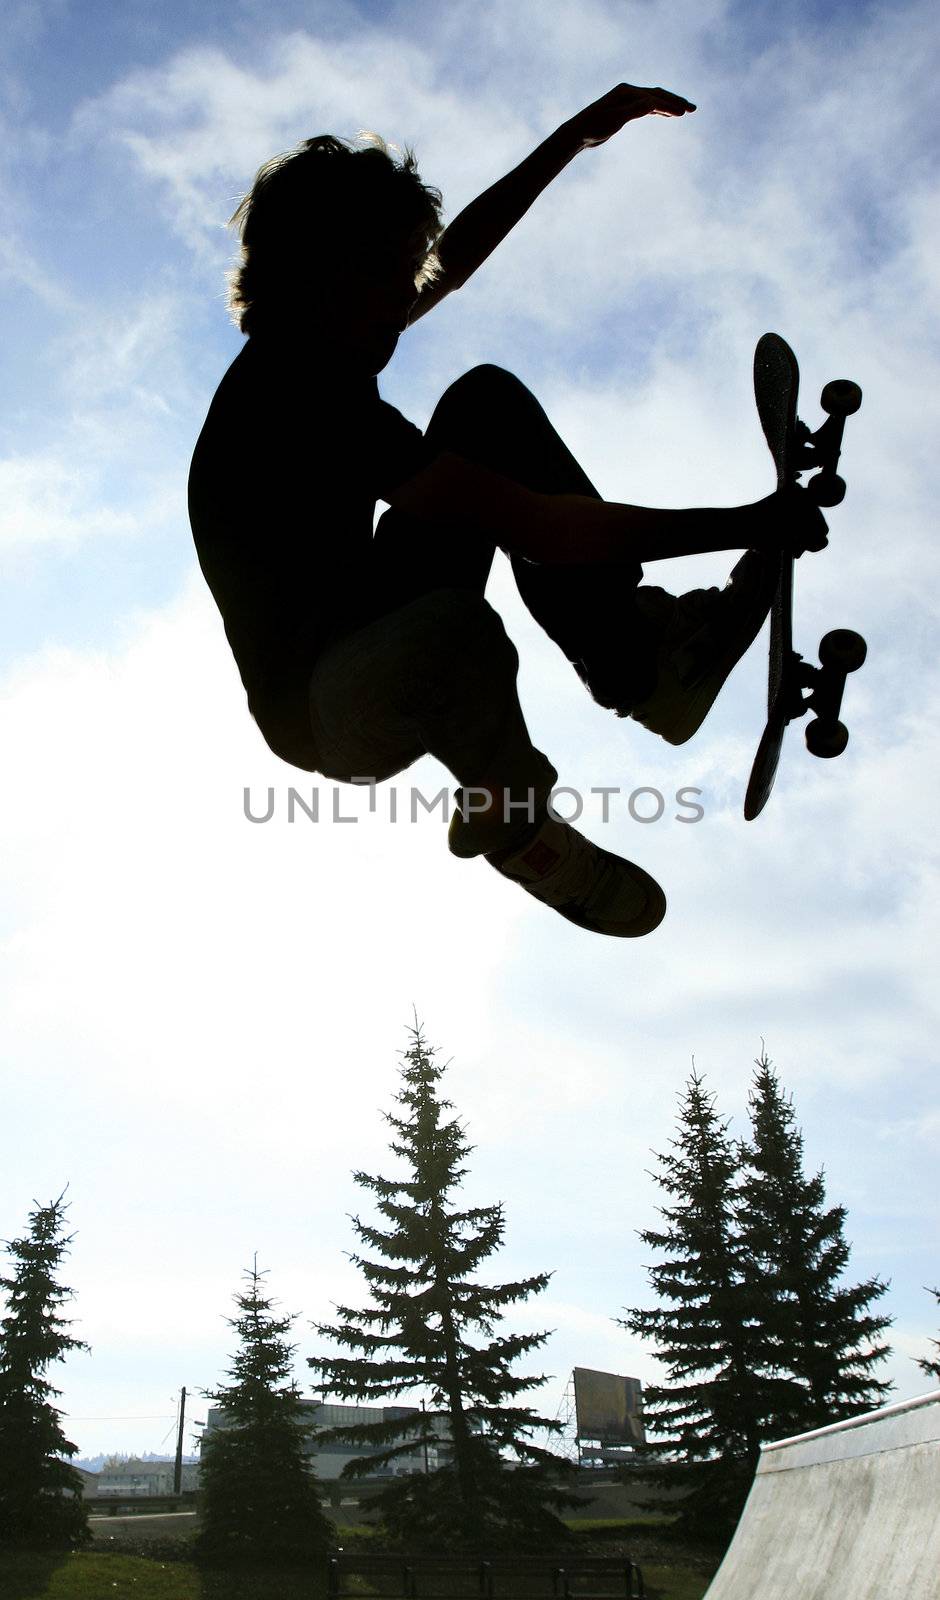 A skateboarder catches some air and is silhouetted against the sky.